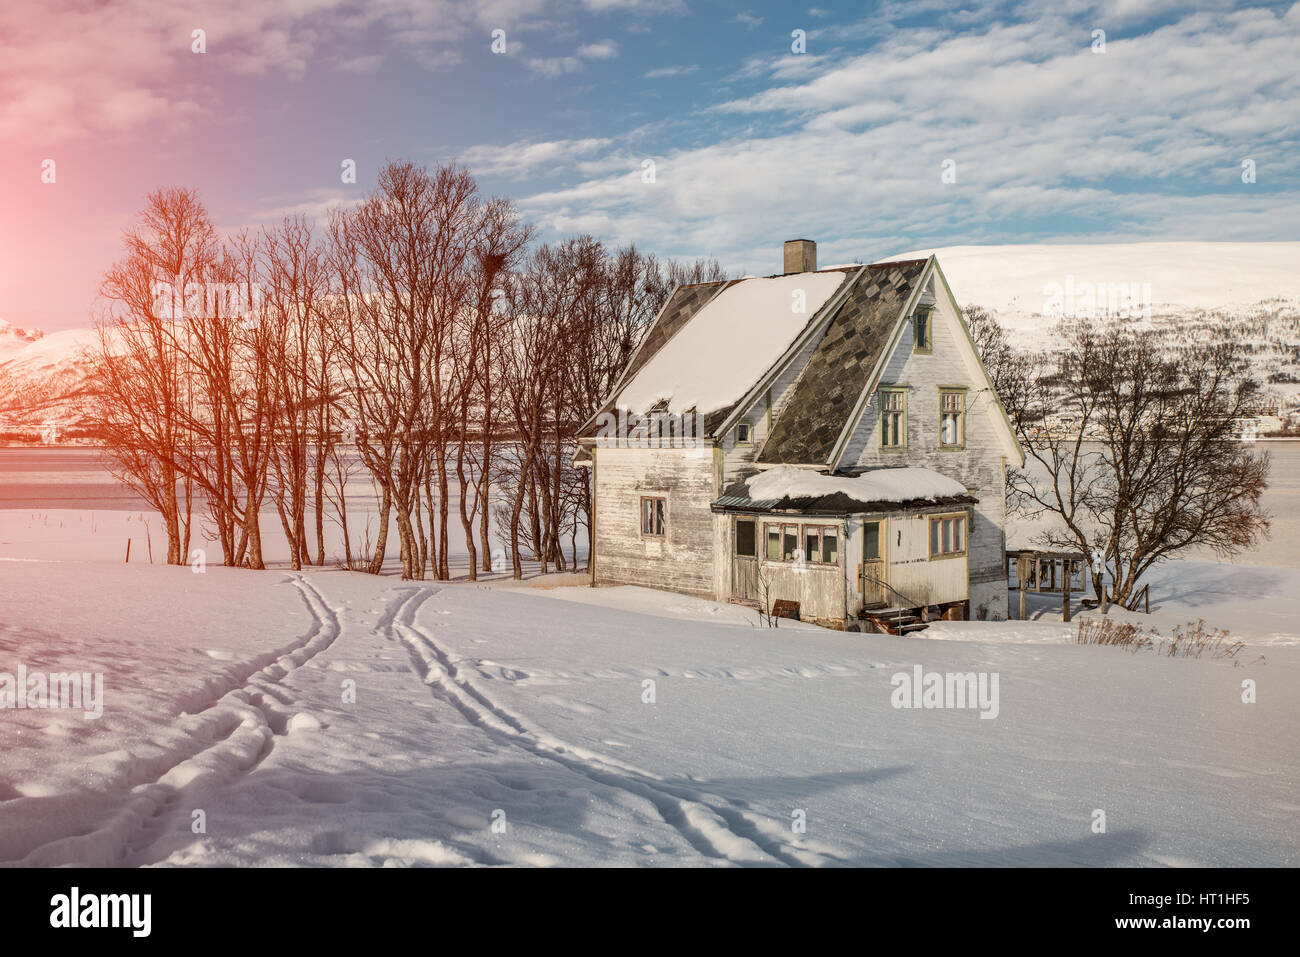 White old house by te frozen lake near the mountains in Norway. Stock Photo